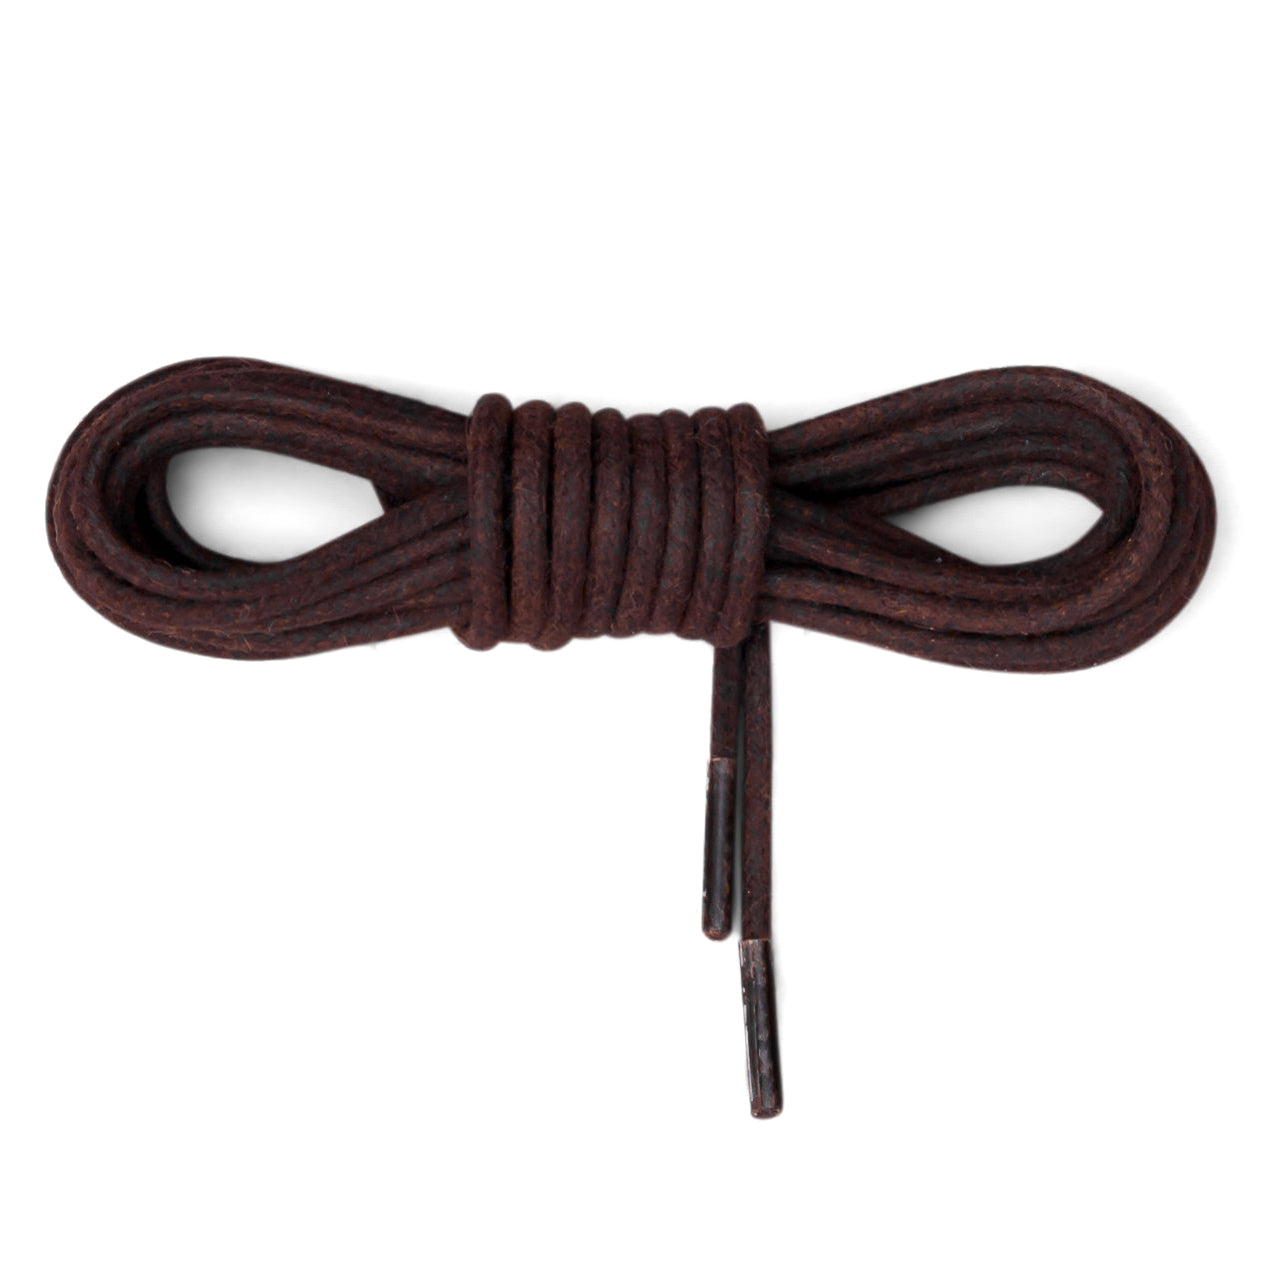 Non-Stretch, Solid and Durable flat kevlar rope 